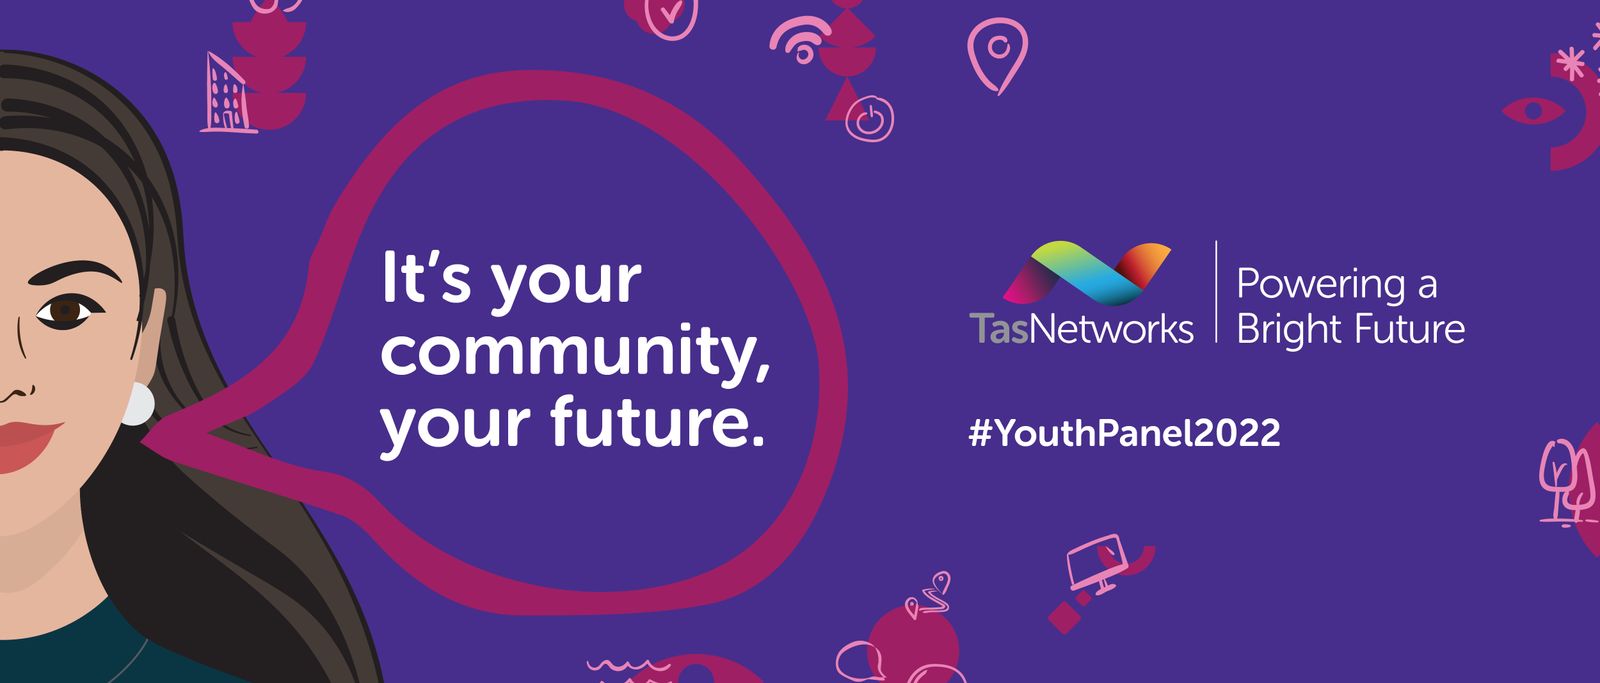 TasNetworks Youth Panel 2022